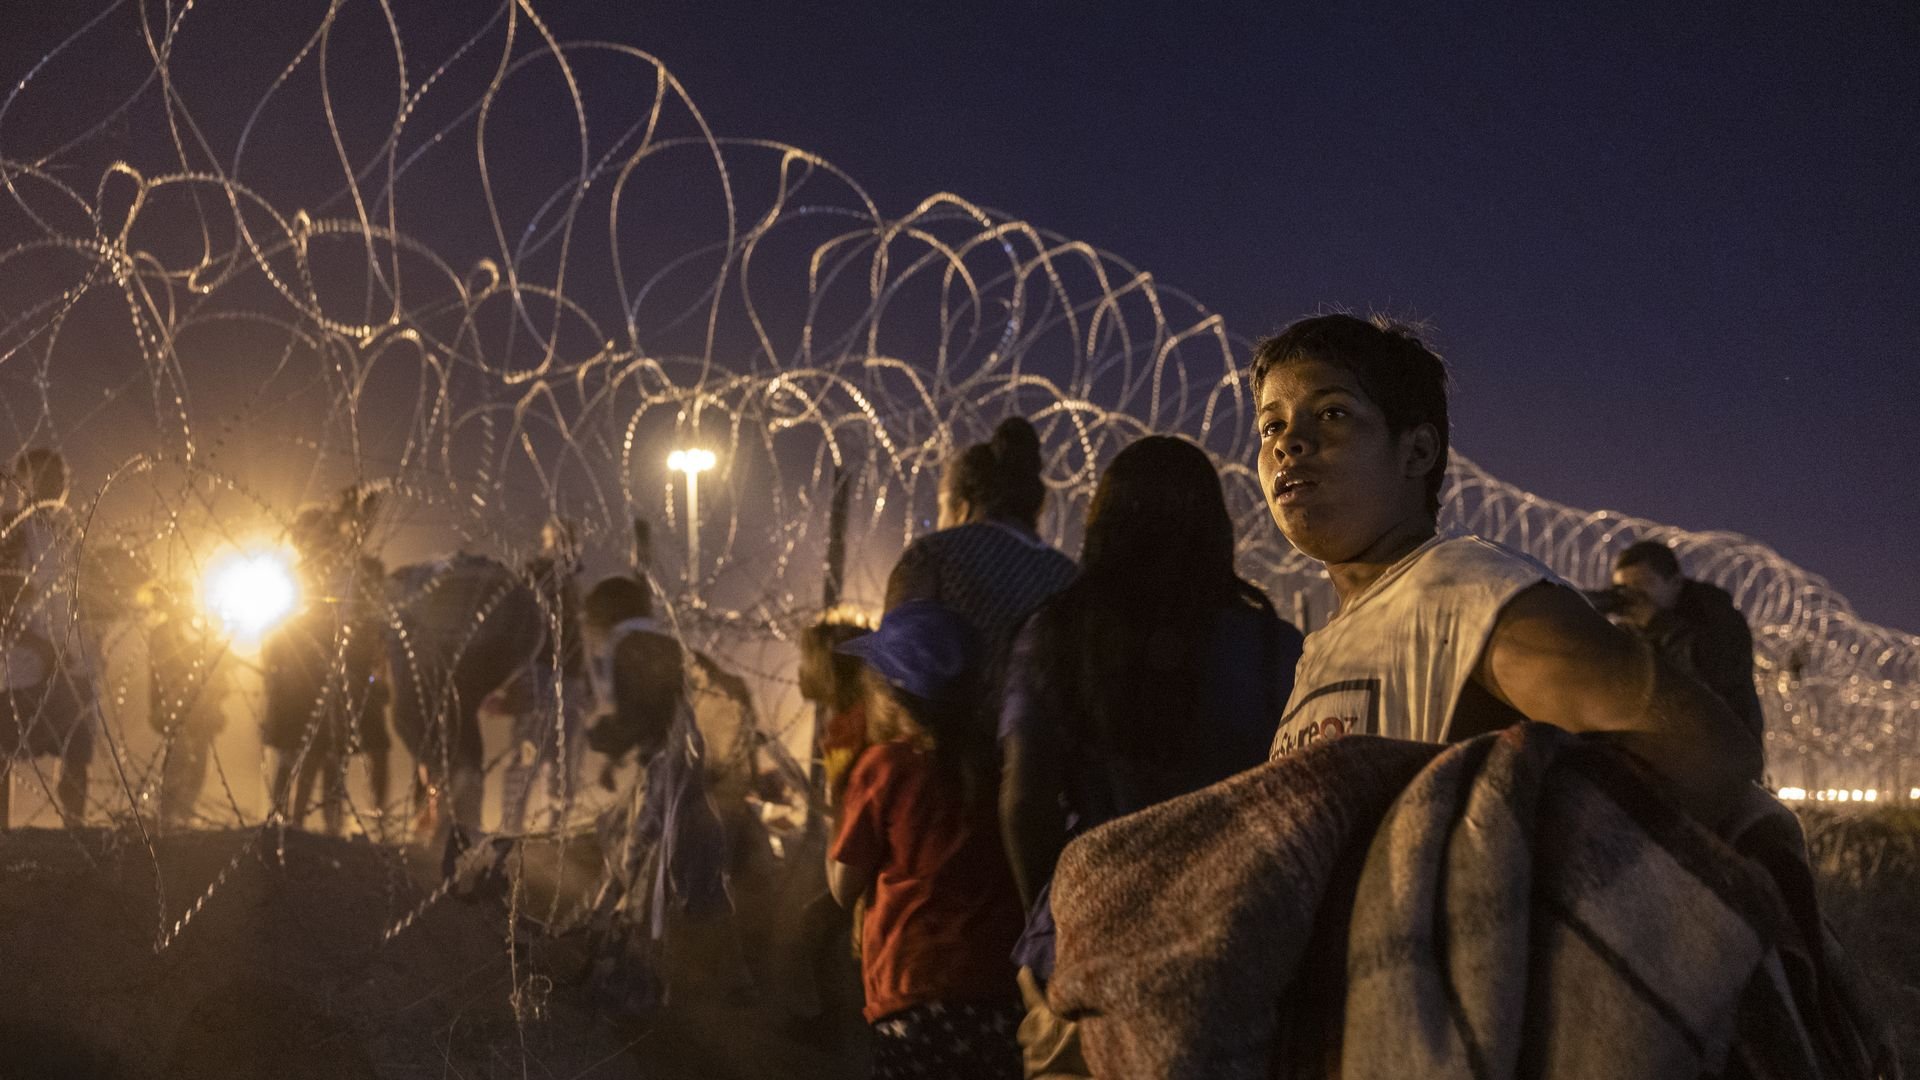 Scenes from the border: Chaos, desperation